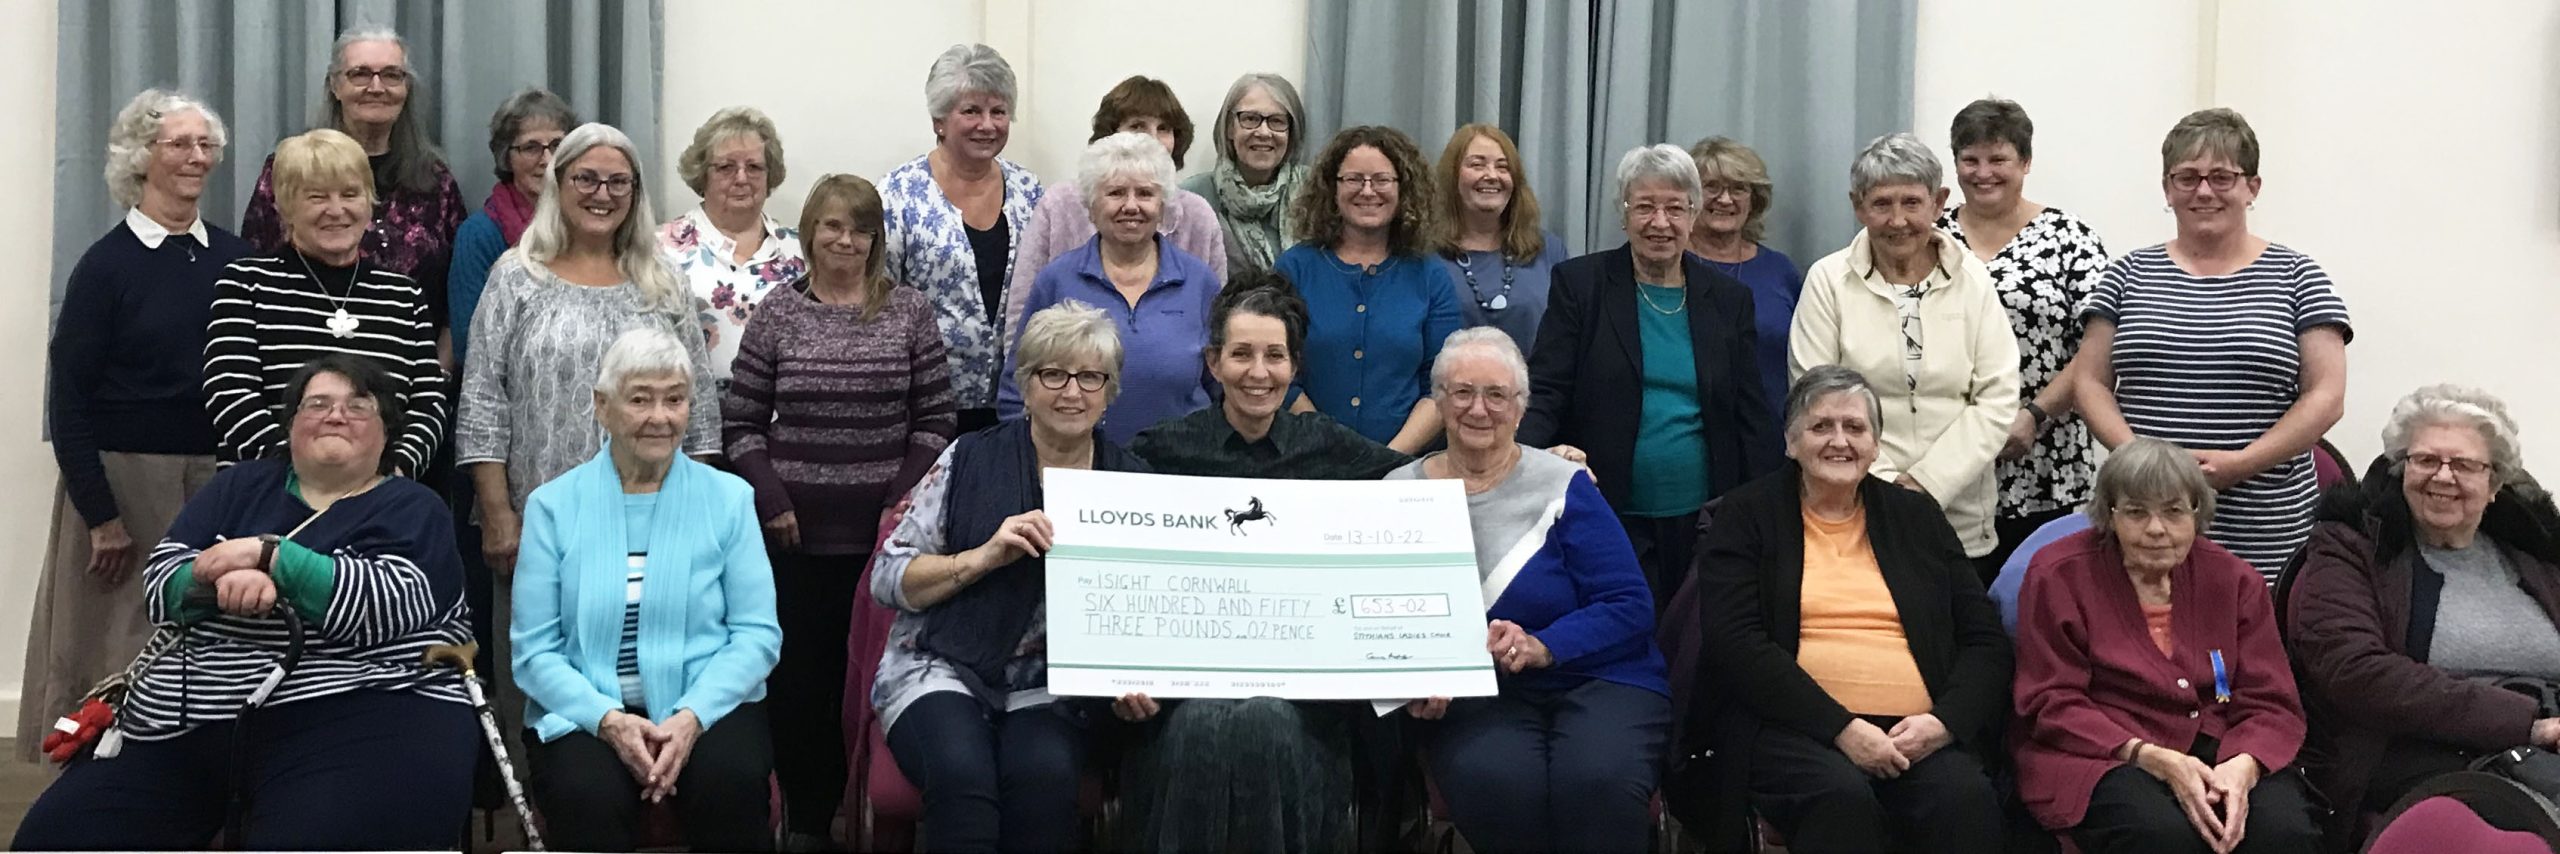 the members of the choir pose with a giant cheque and iSightCornwall's Carole Theobald